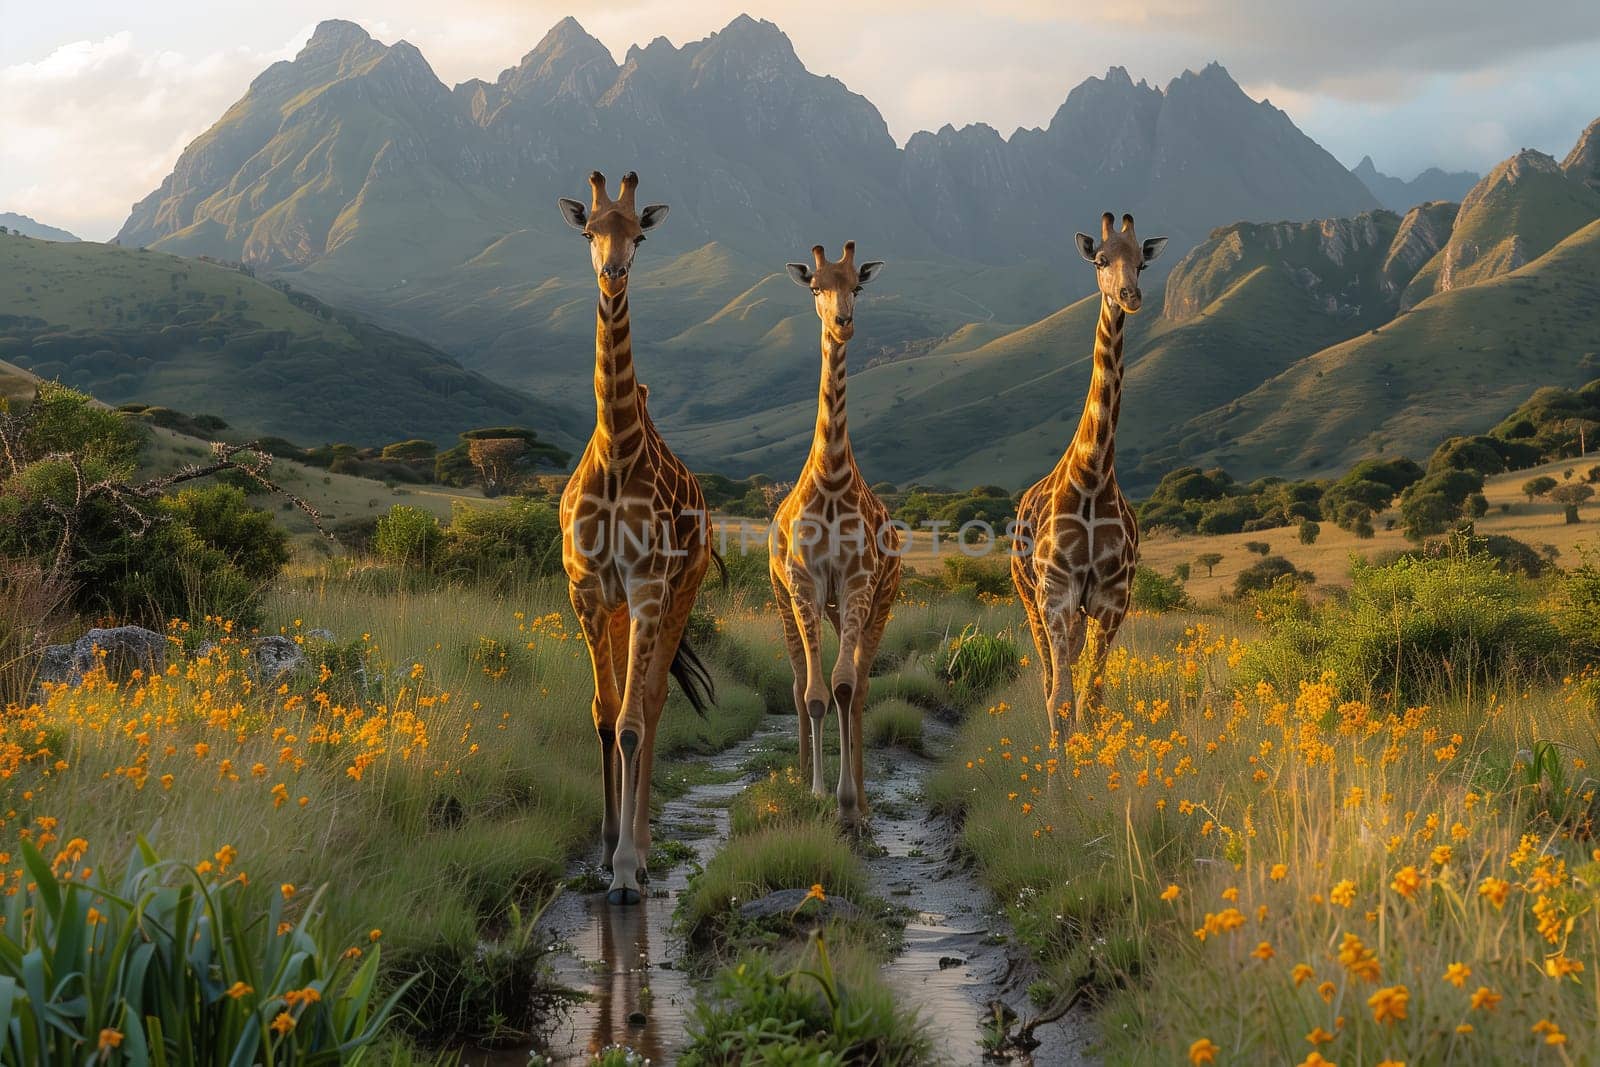 Three Giraffidae standing together in a field with mountains in the background. The sky is filled with fluffy clouds, enhancing the natural landscape